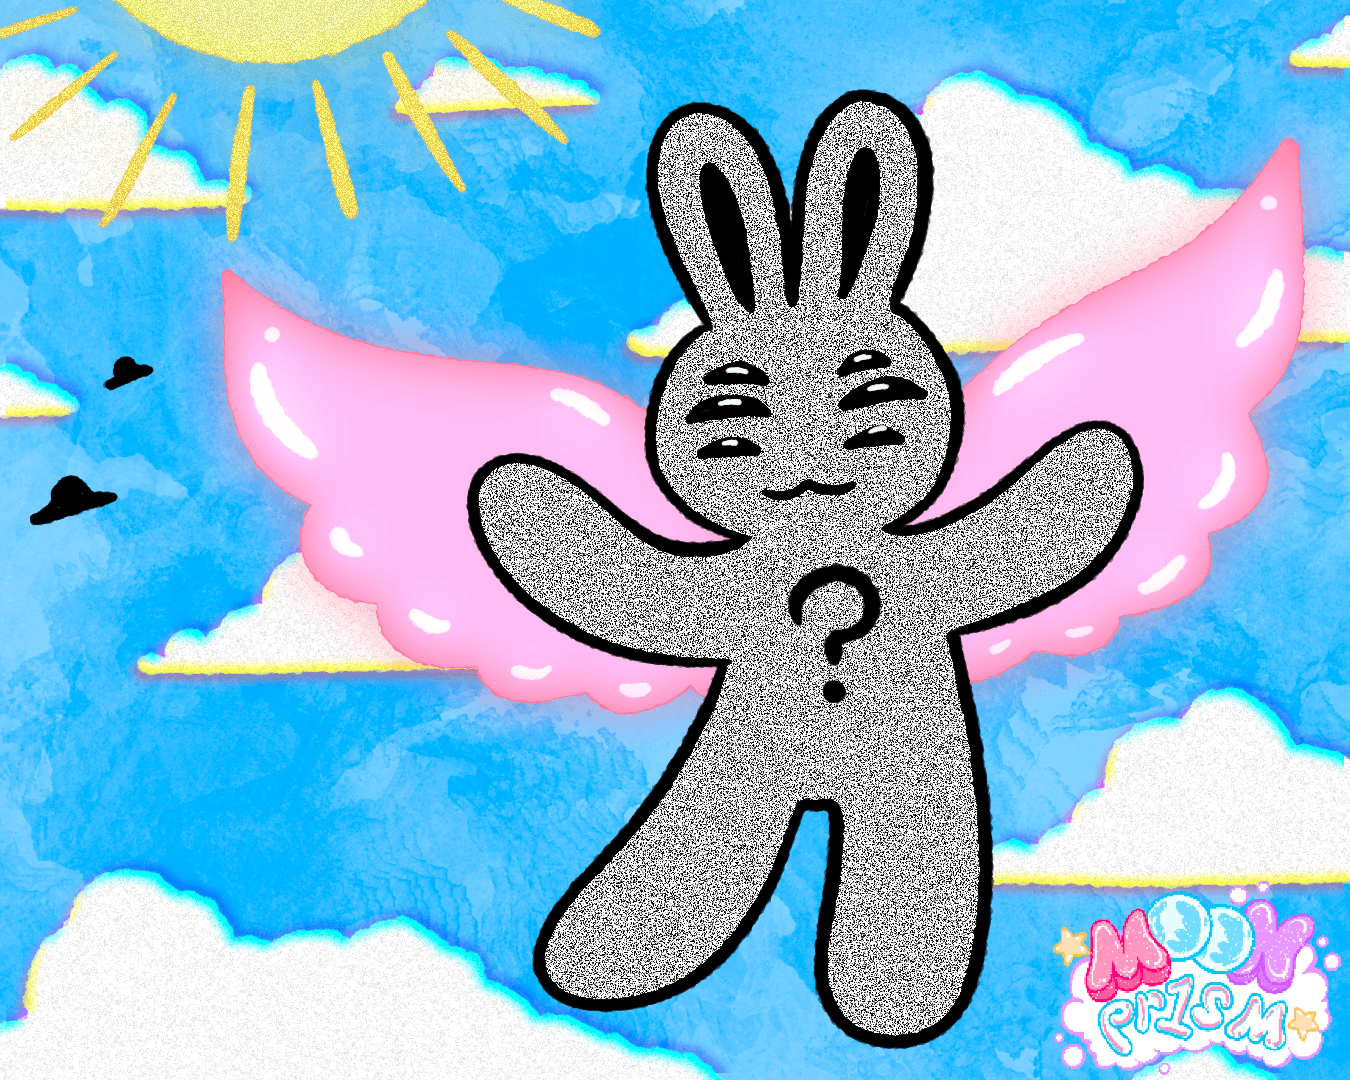 An illustration depicting a smiling rabbit with a body of TV static, six black eyes and a black question mark on their stomach. The rabbit has pink glowing wings and is flying up in a bright blue sky with fluffy white clouds and a sun shining down. Two little black UFO shapes are off in the distance. The scene is hopeful!